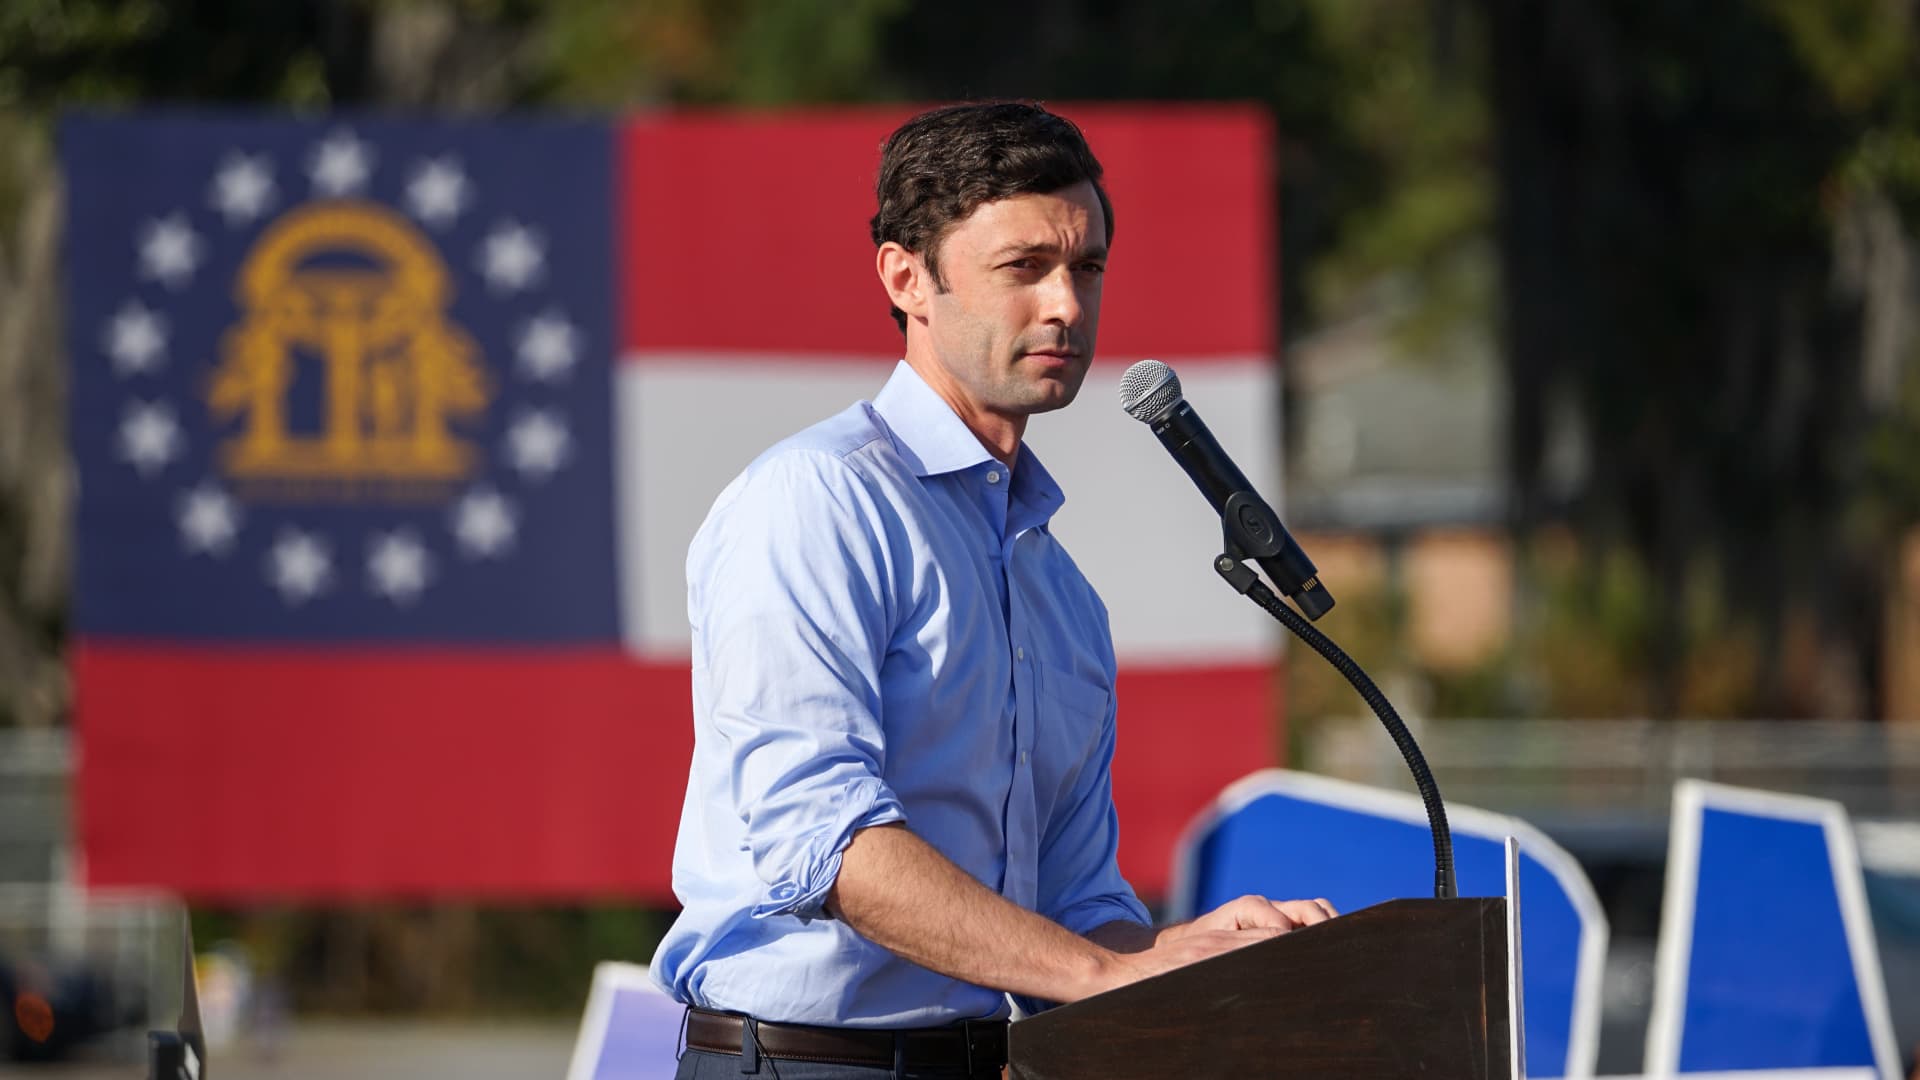 Democratic U.S. Senate candidate Jon Ossoff speaks to a group of supporters at a Its Time to Vote Rally on December 19, 2020 in Savannah, Georgia.